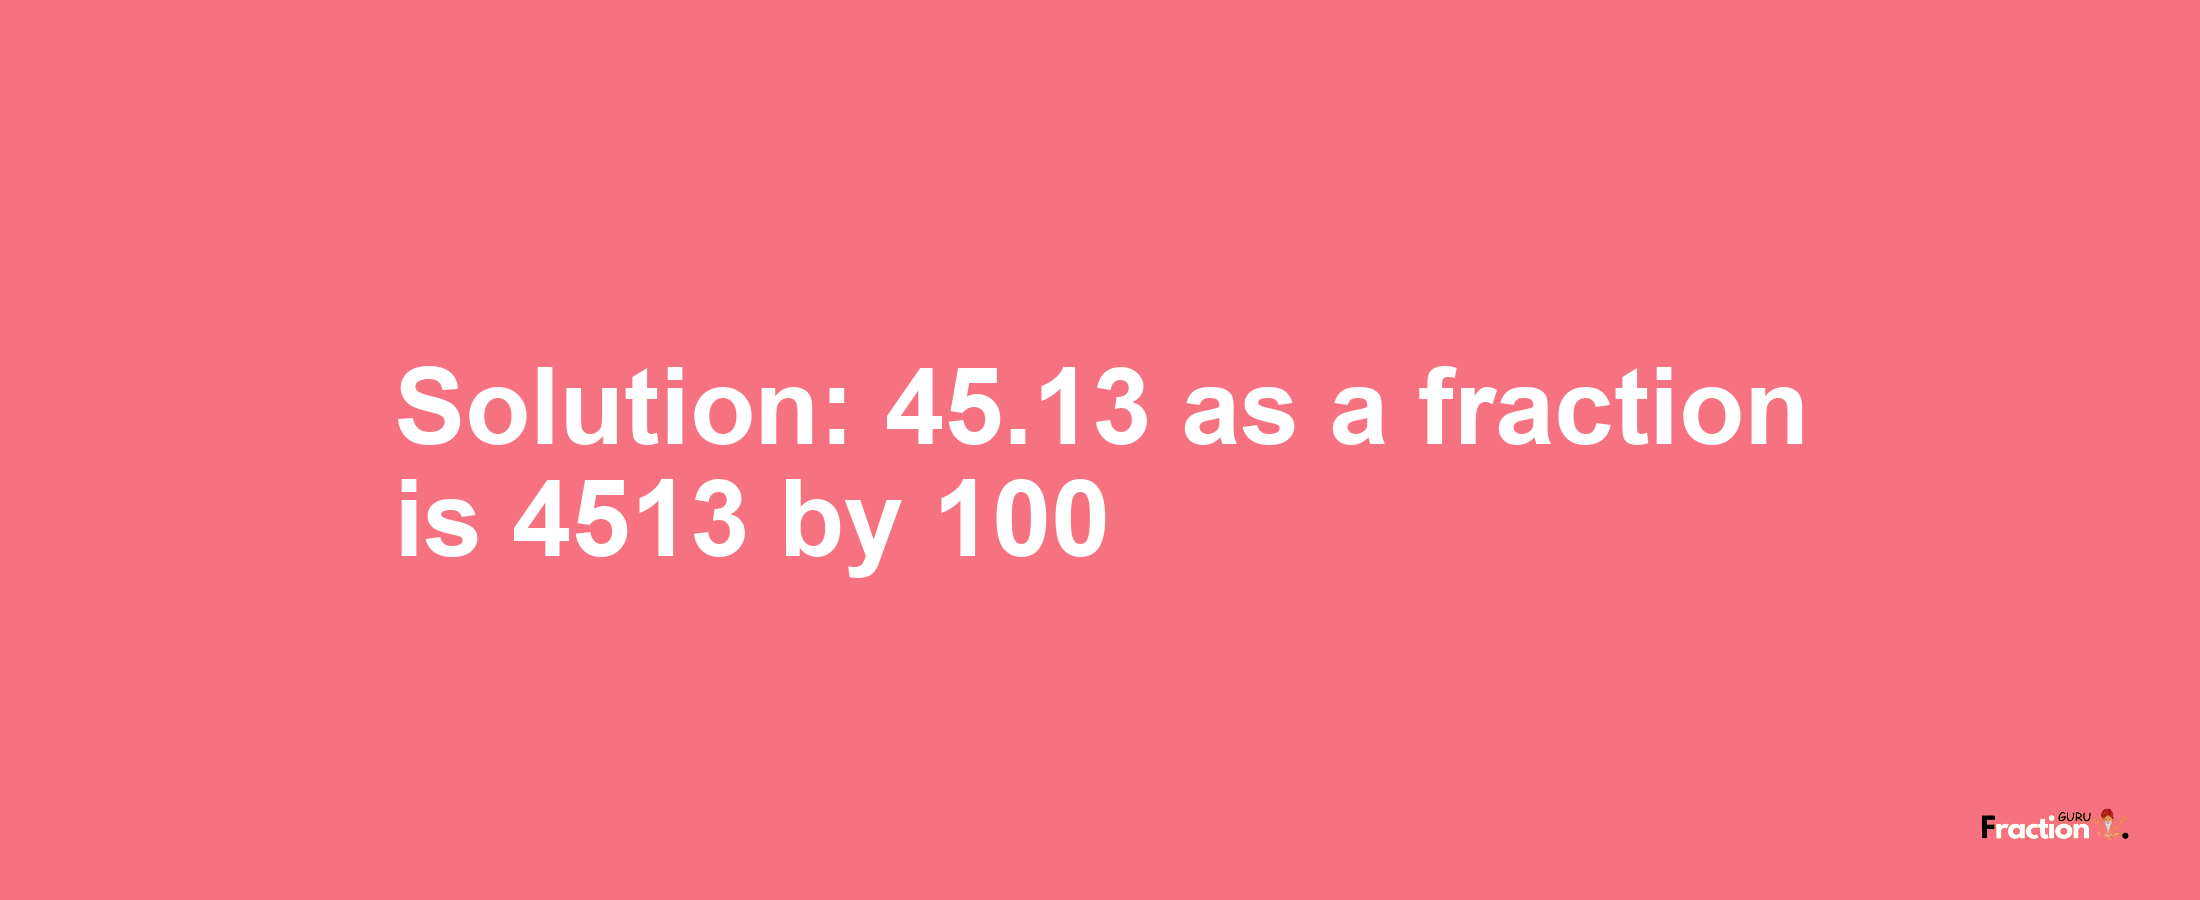 Solution:45.13 as a fraction is 4513/100